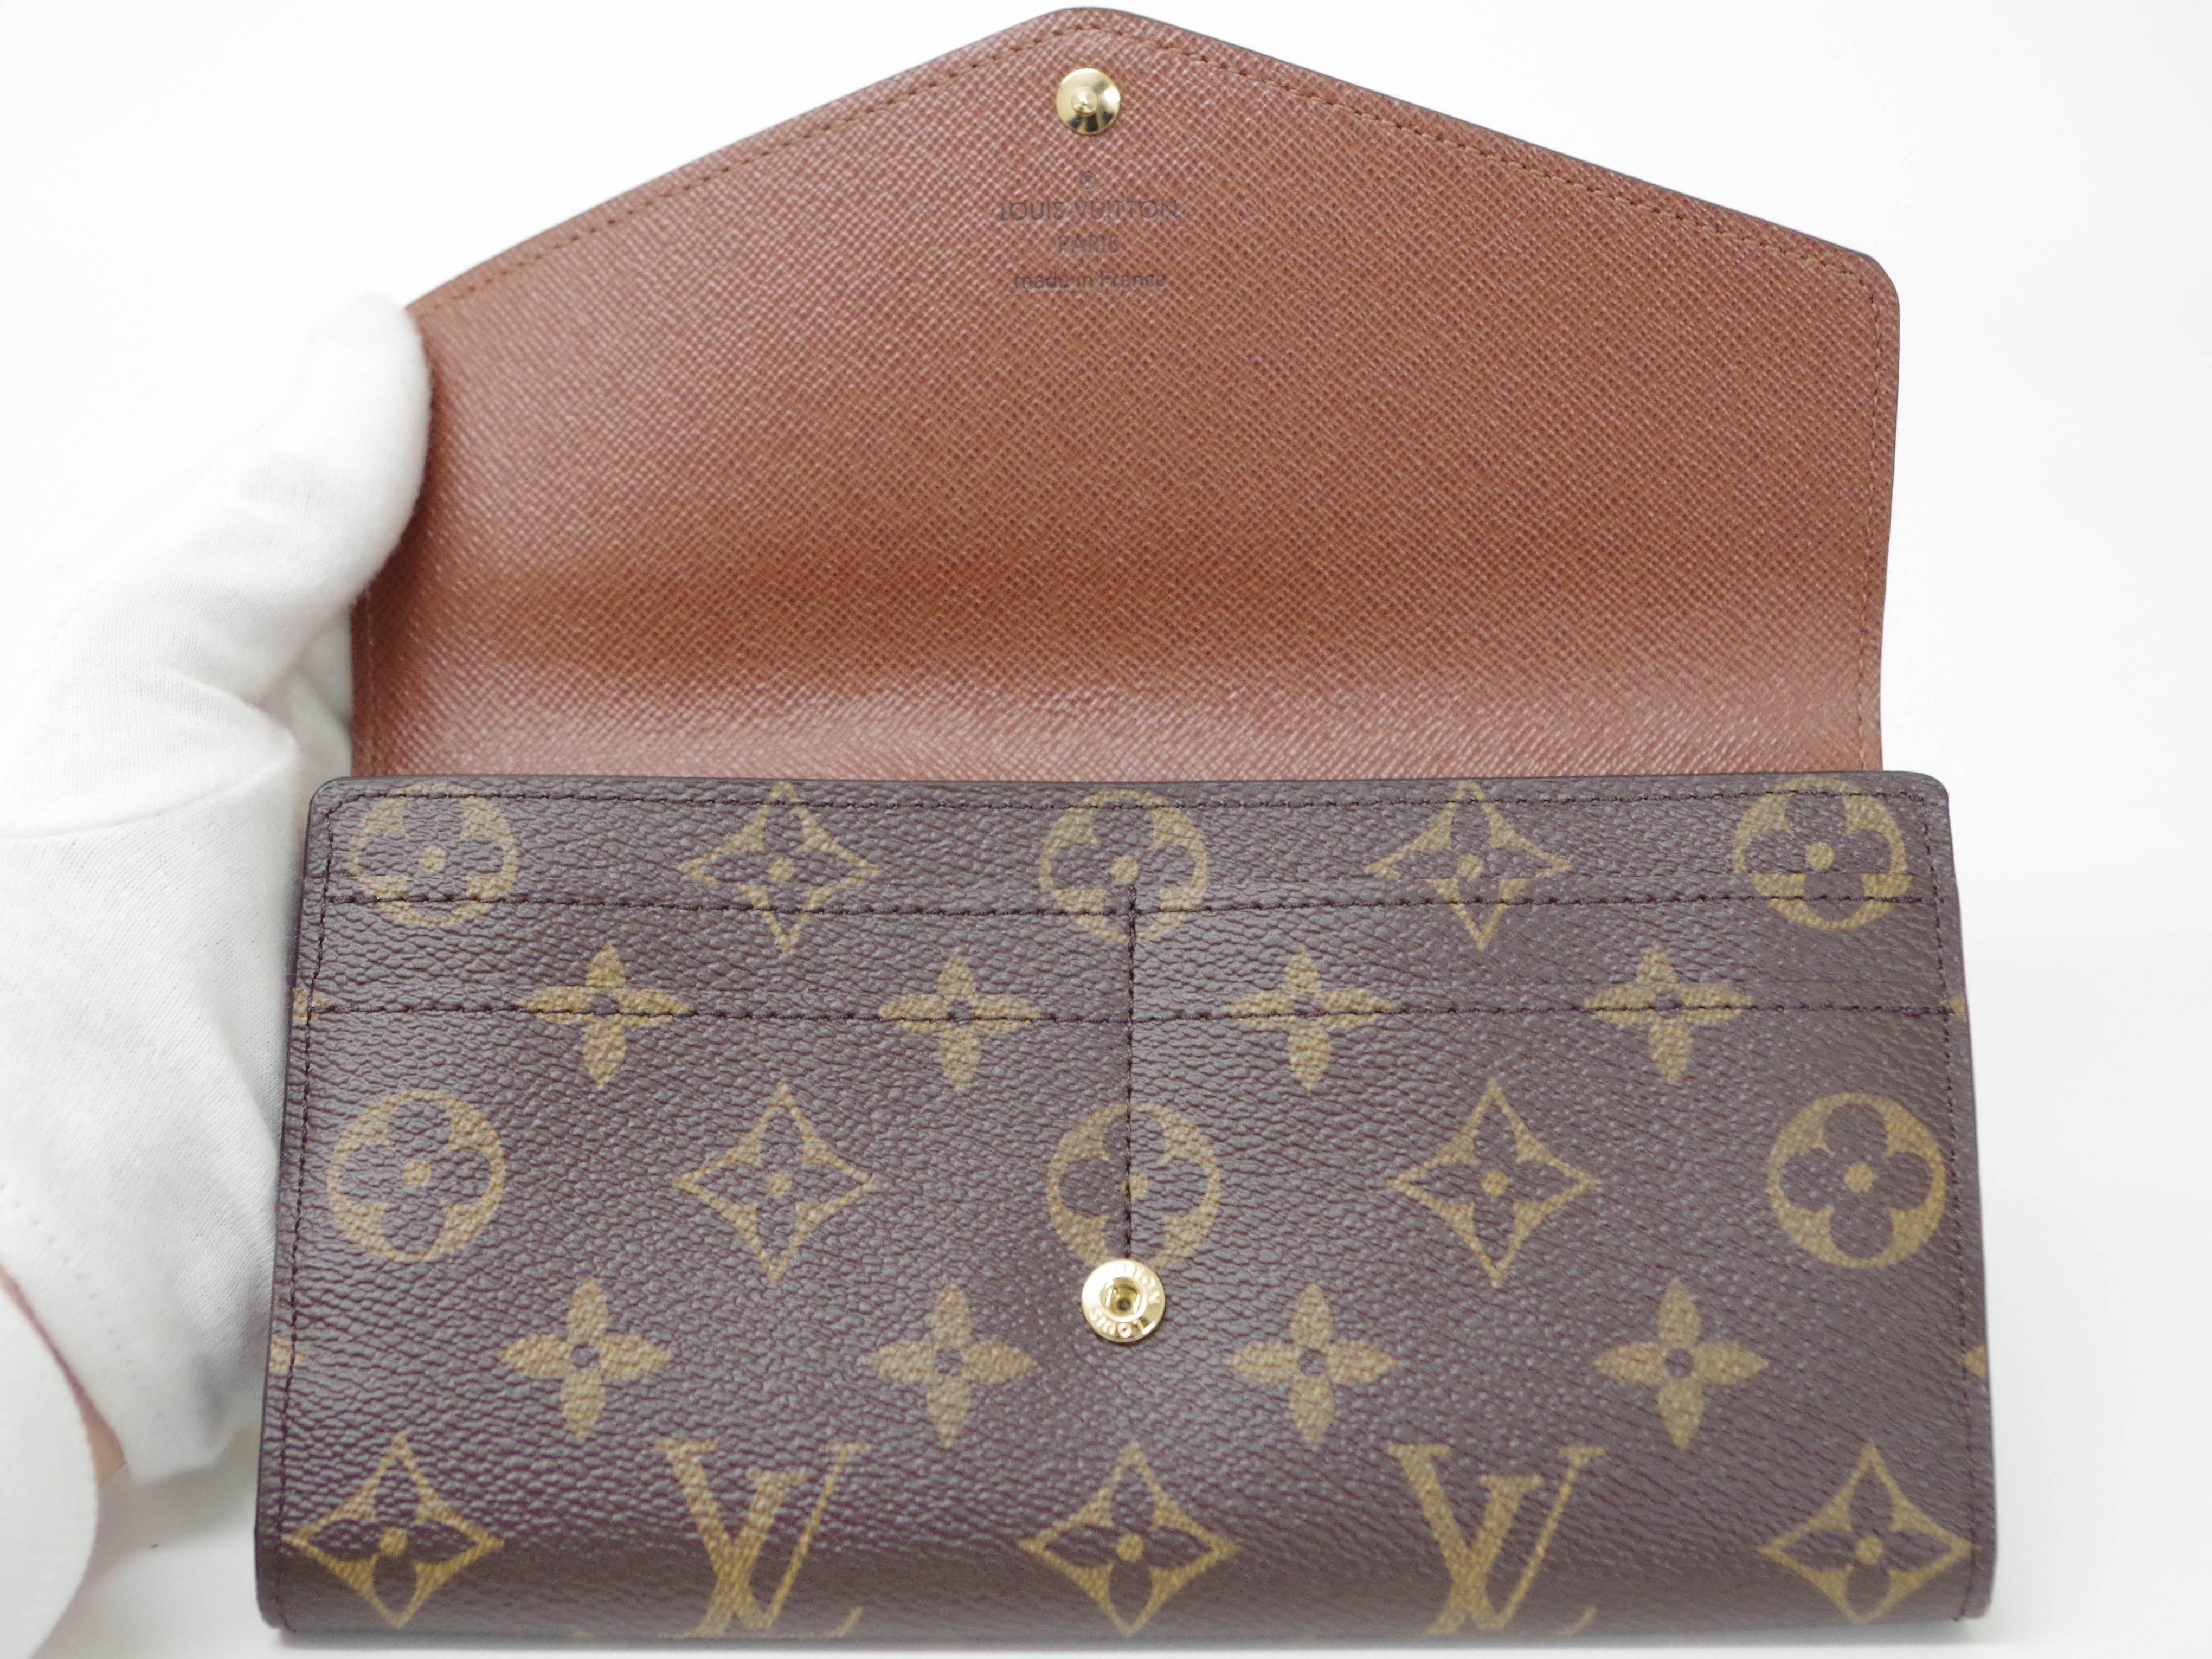 LOUIS VUITTON - 美品❤️フォローで1000円OFF❤️ ルイヴィトン